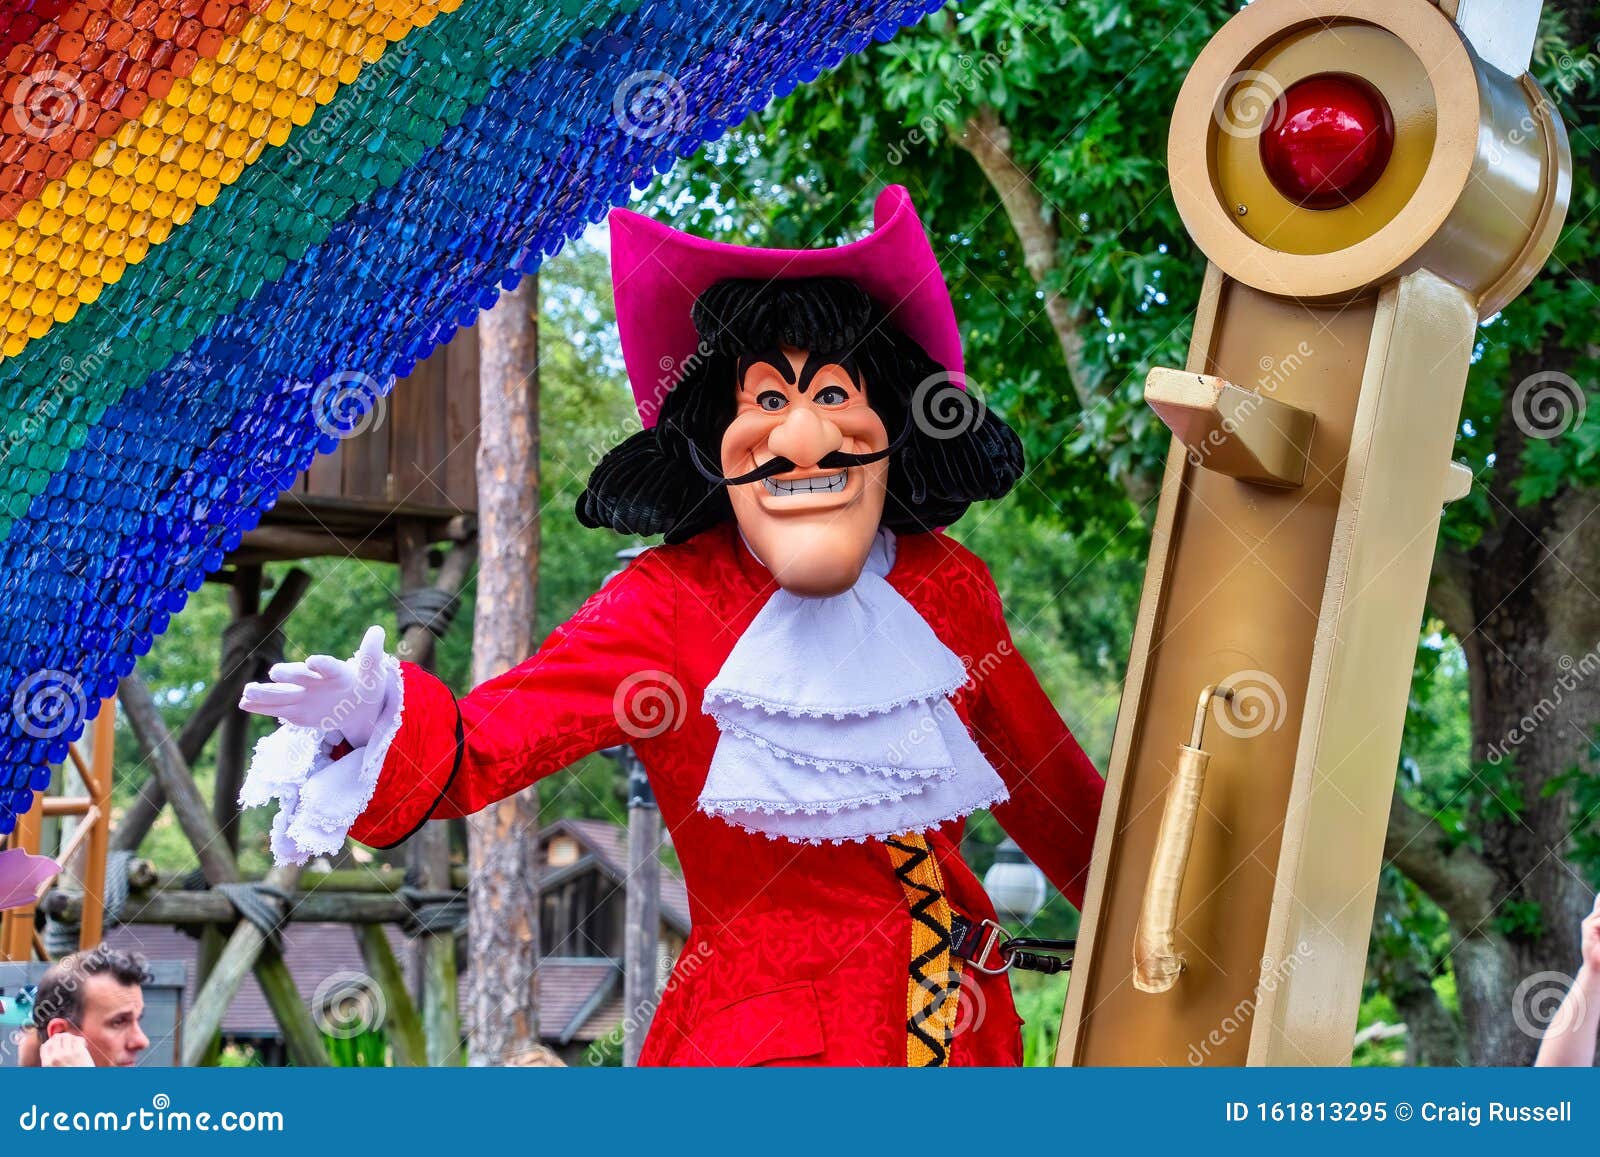 Captain Hook Character from the Festival of Fantasy Parade